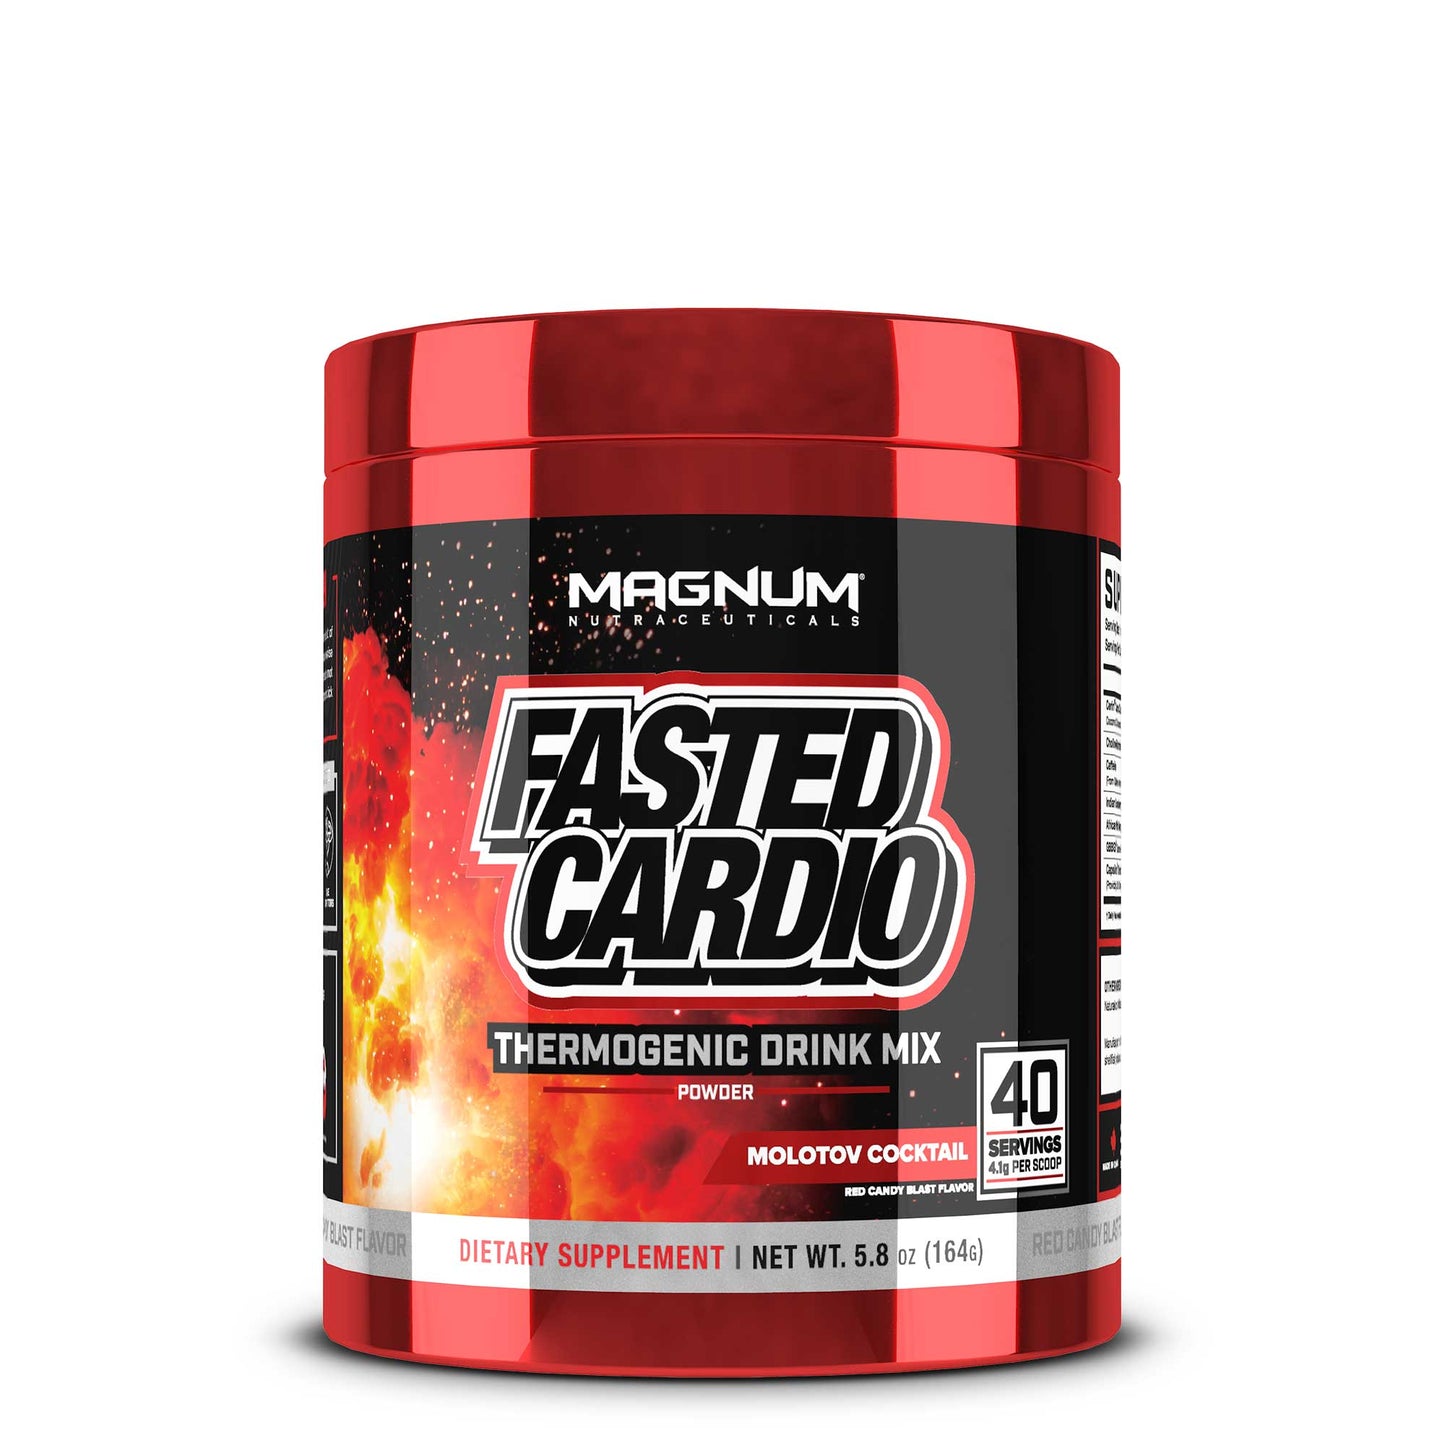 Fasted Cardio, Thermogenic Drink Mix, Molotov Cocktail, Red Candy Blast flavor, 40 servings